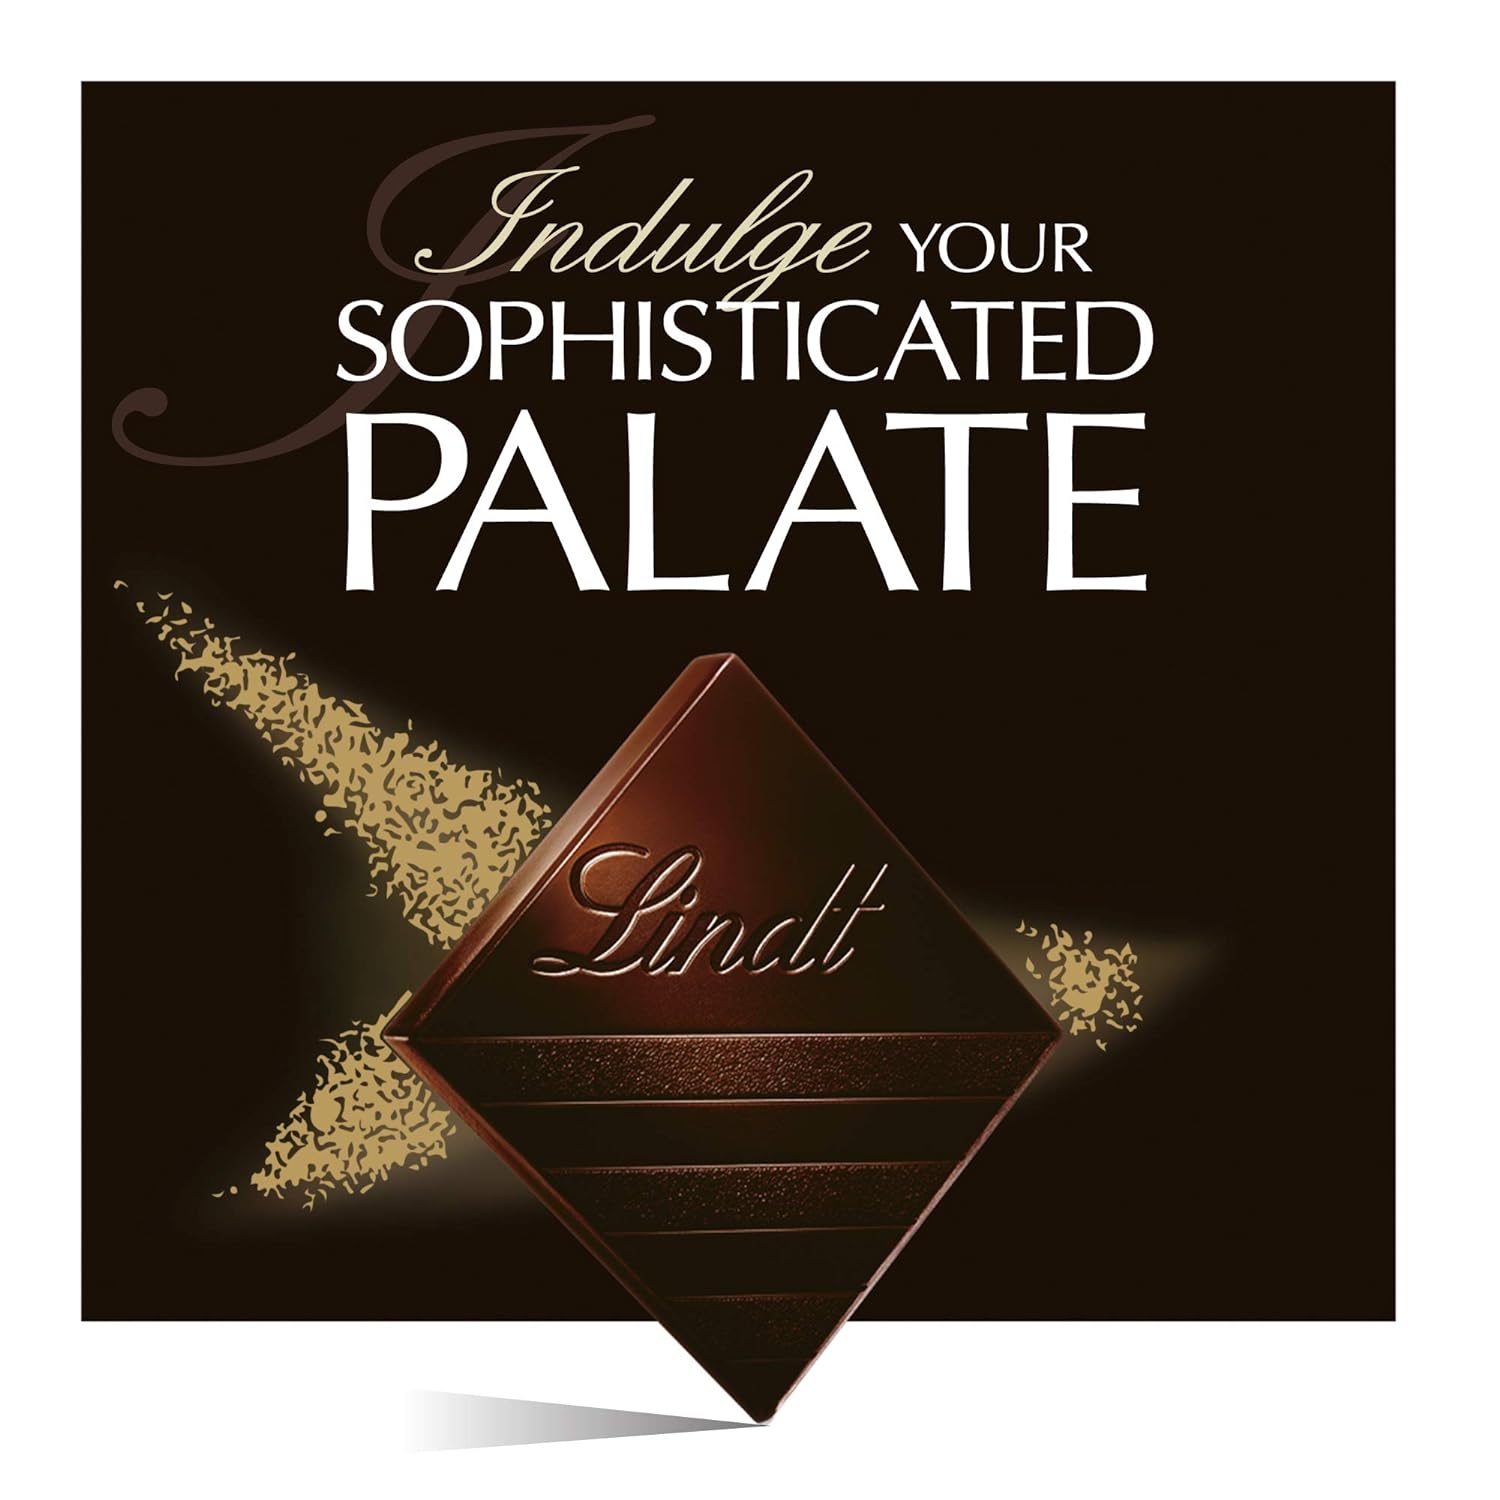  Lindt Excellence Bar, 90% Cocoa Supreme Dark Chocolate, Gluten Free, Great for Holiday Gifting, 3.5 Ounce (Pack of 12)